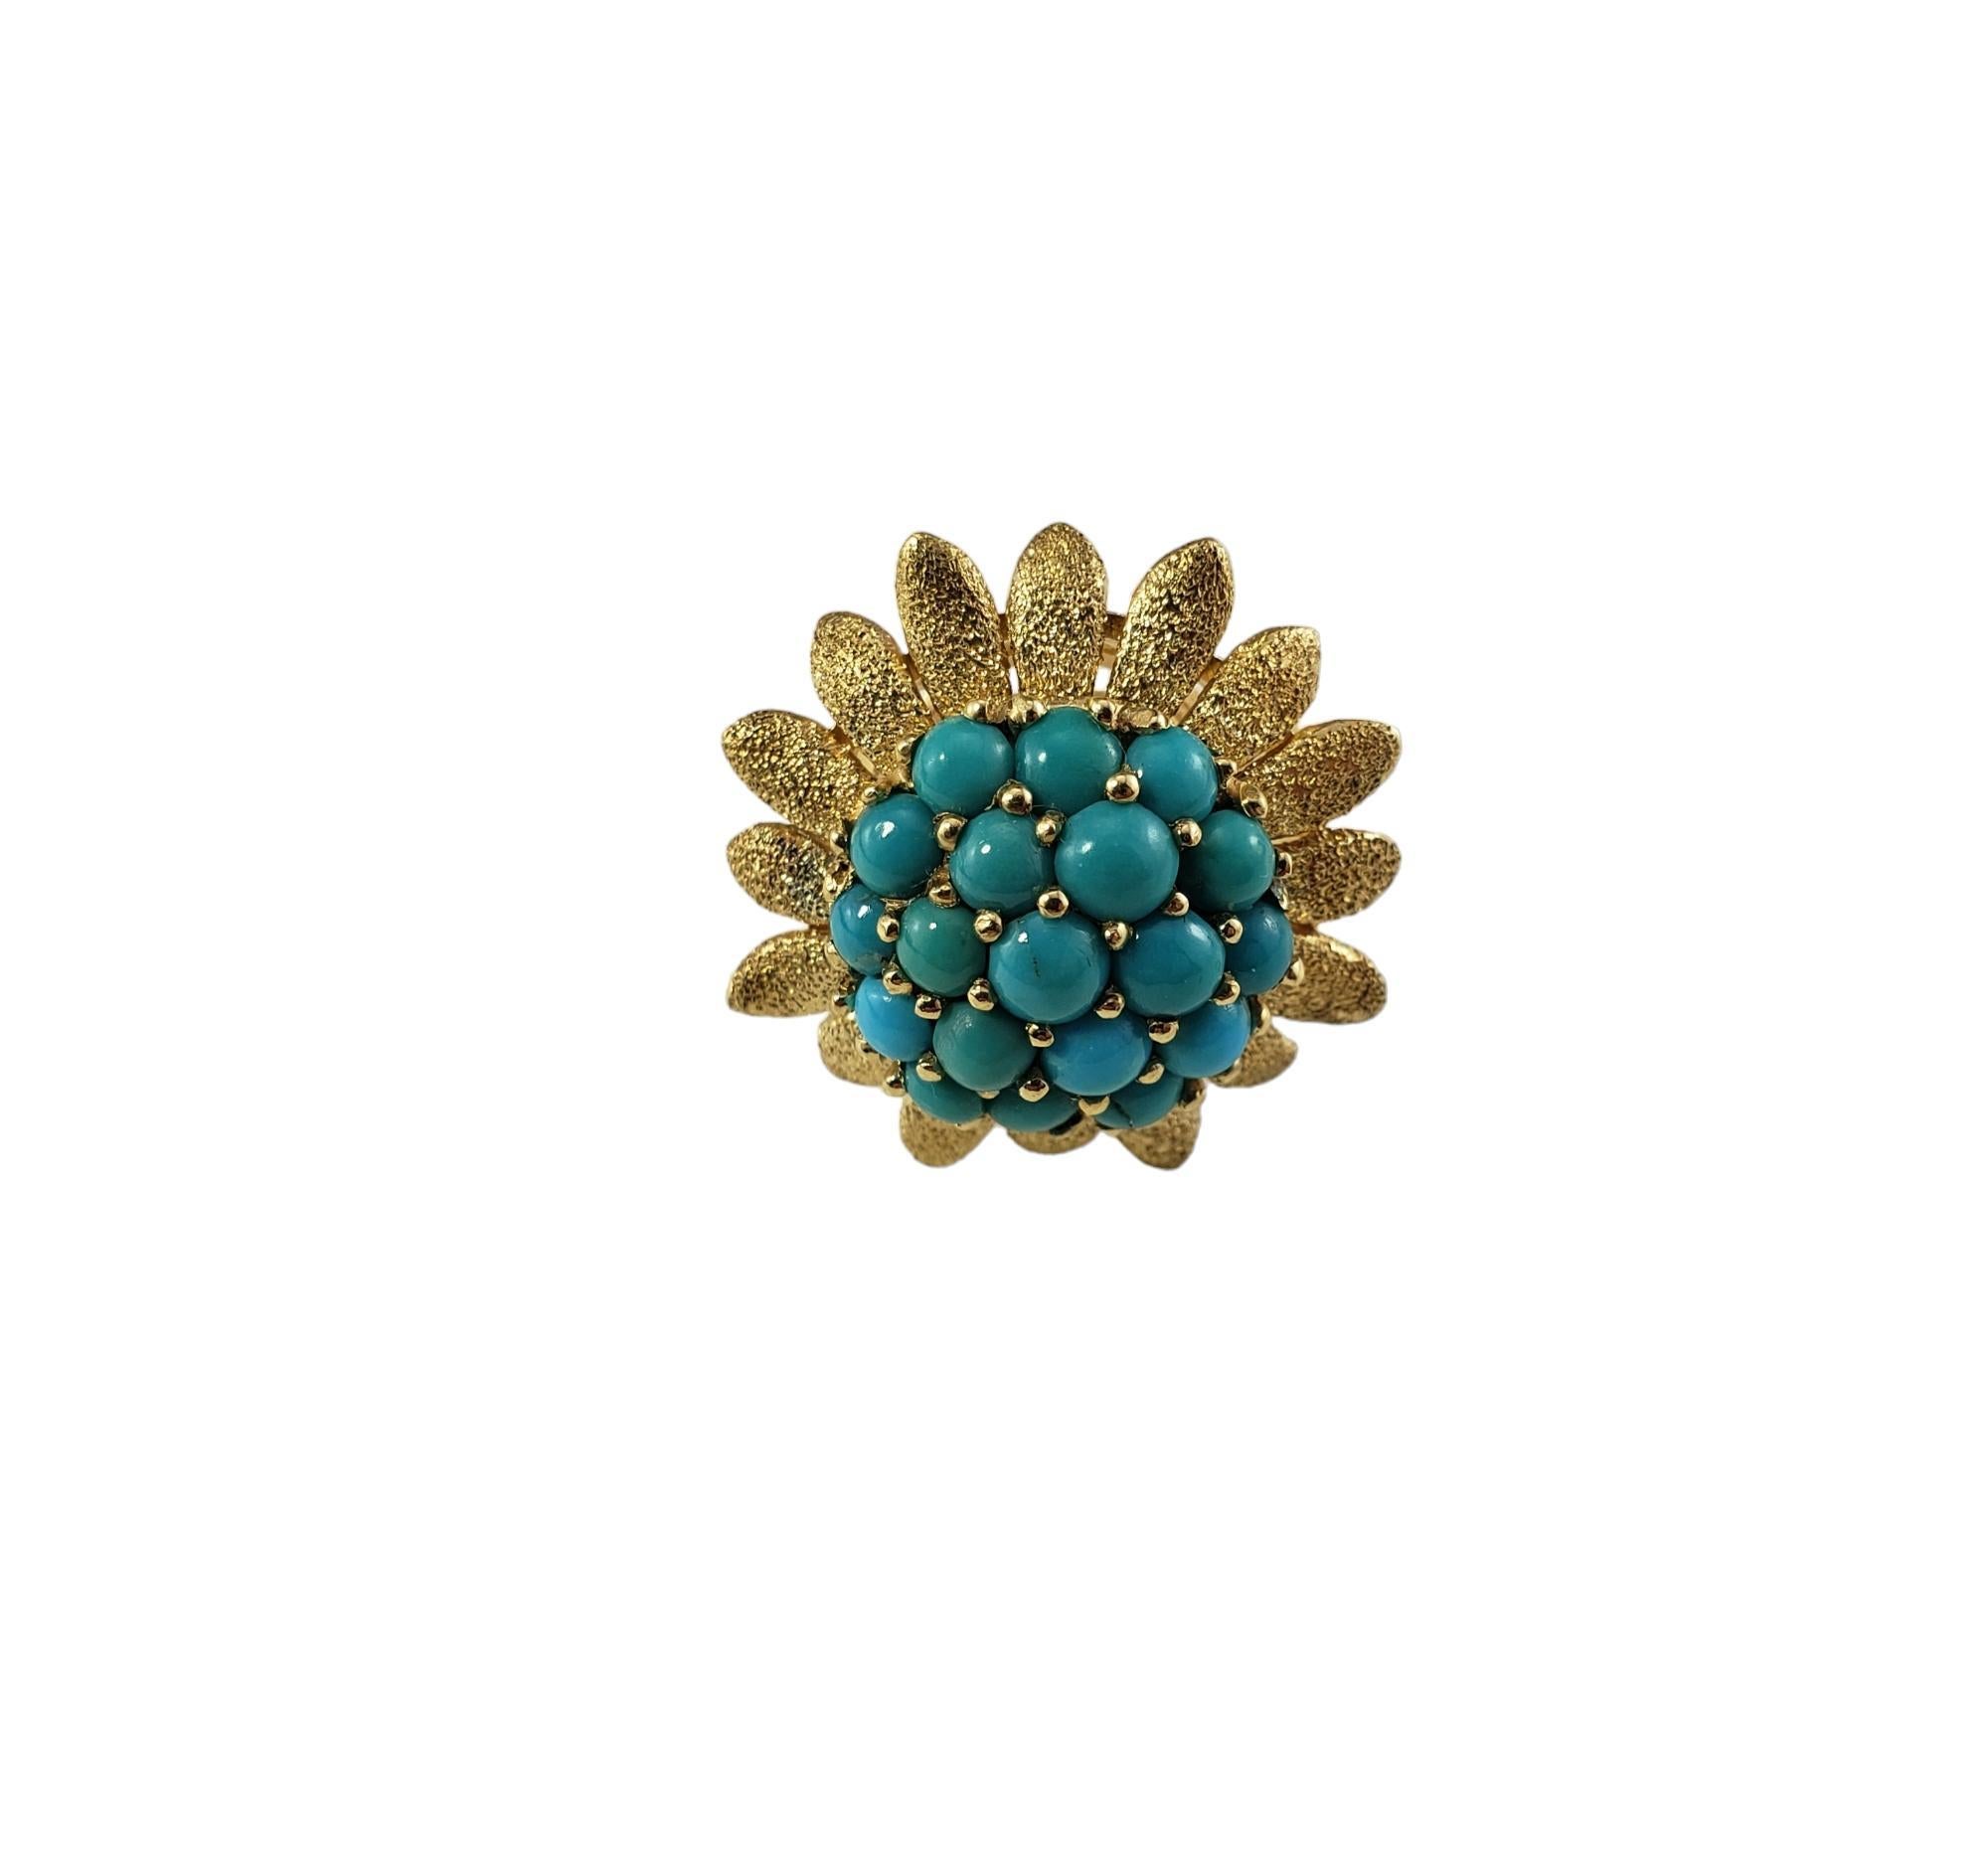 Vintage 14K Yellow Gold and Turquoise Sunflower Ring Size 6.24-6.5-

This stunning sunflower ring features 18 round turquoise stones set in beautifully detailed 14K yellow gold.  

Diameter 24 mm / Height 12.4 mm

Shank: 2 mm.

Ring Size: